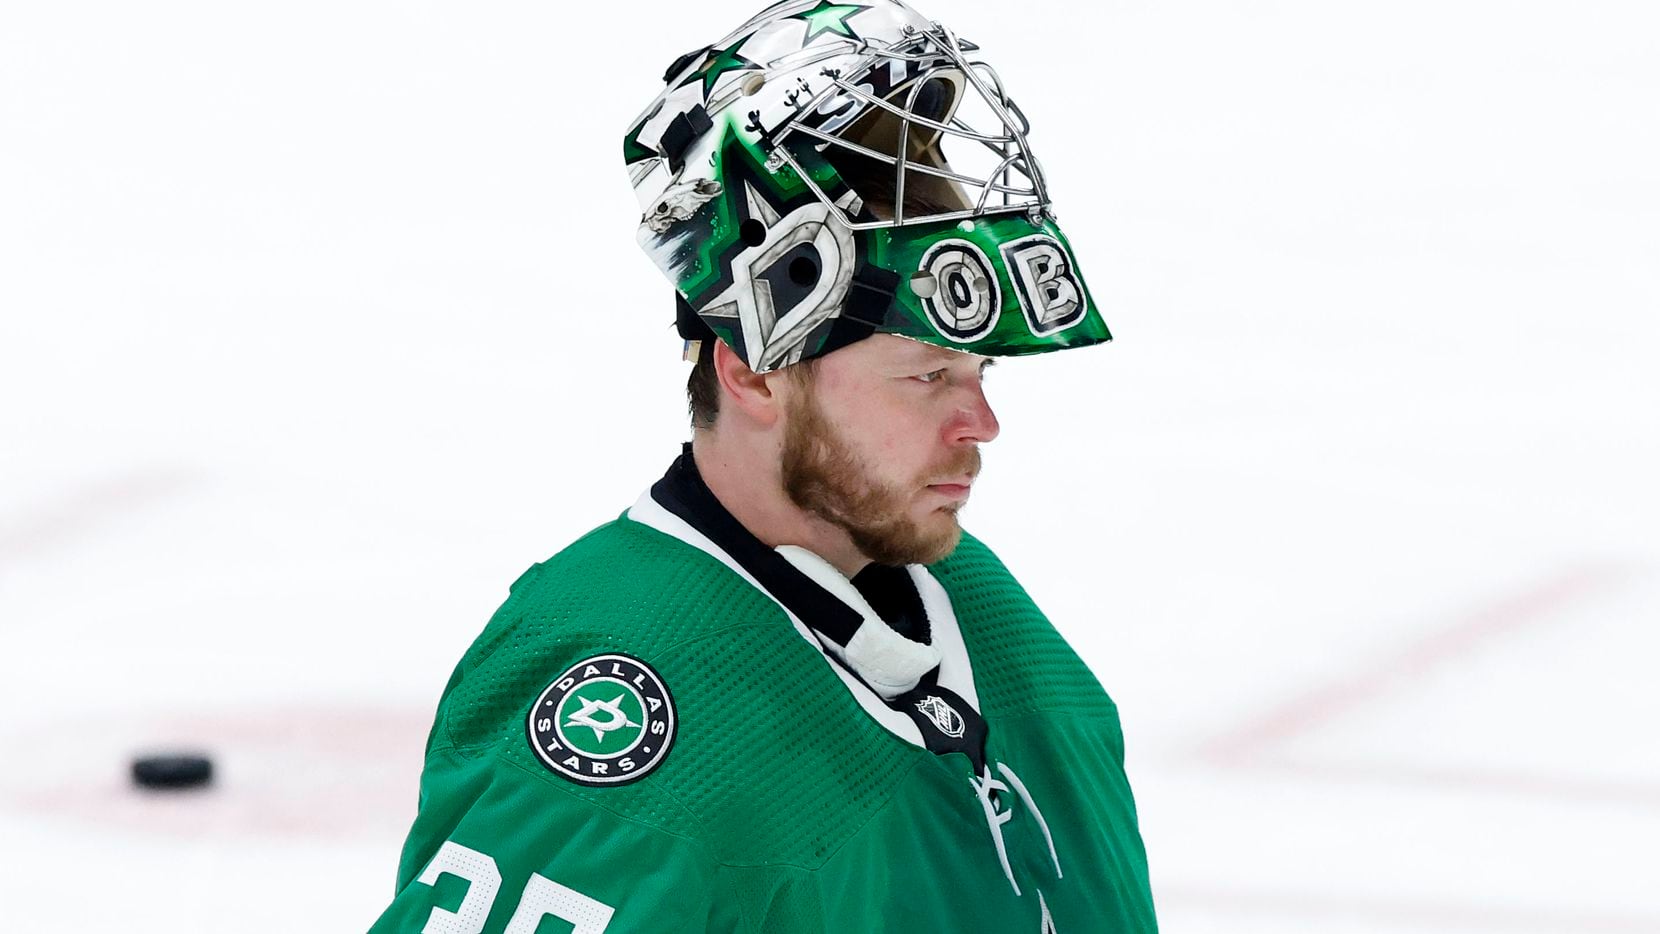 Dallas Stars goaltender Anton Khudobin (35) skates to the goal following a third period break in play against the Carolina Hurricanes at the American Airlines Center in Dallas, Tuesday, April 27, 2021.